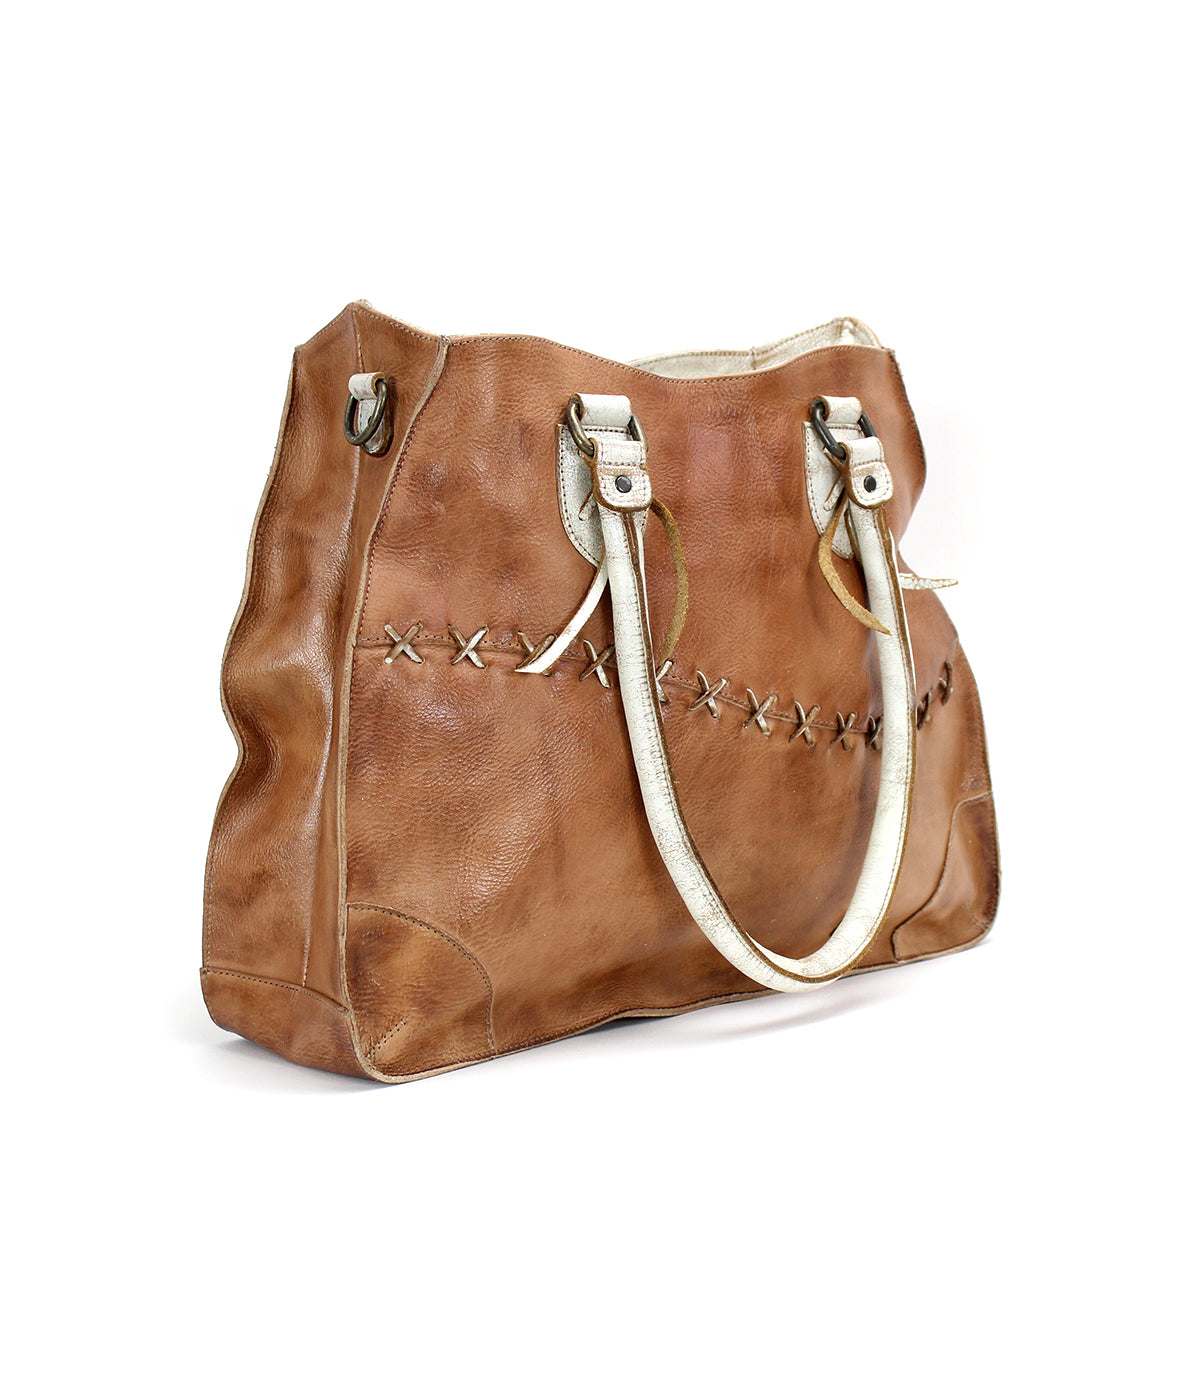 A Bruna brown leather bag with white shoulder straps and zipper by Bed Stu.